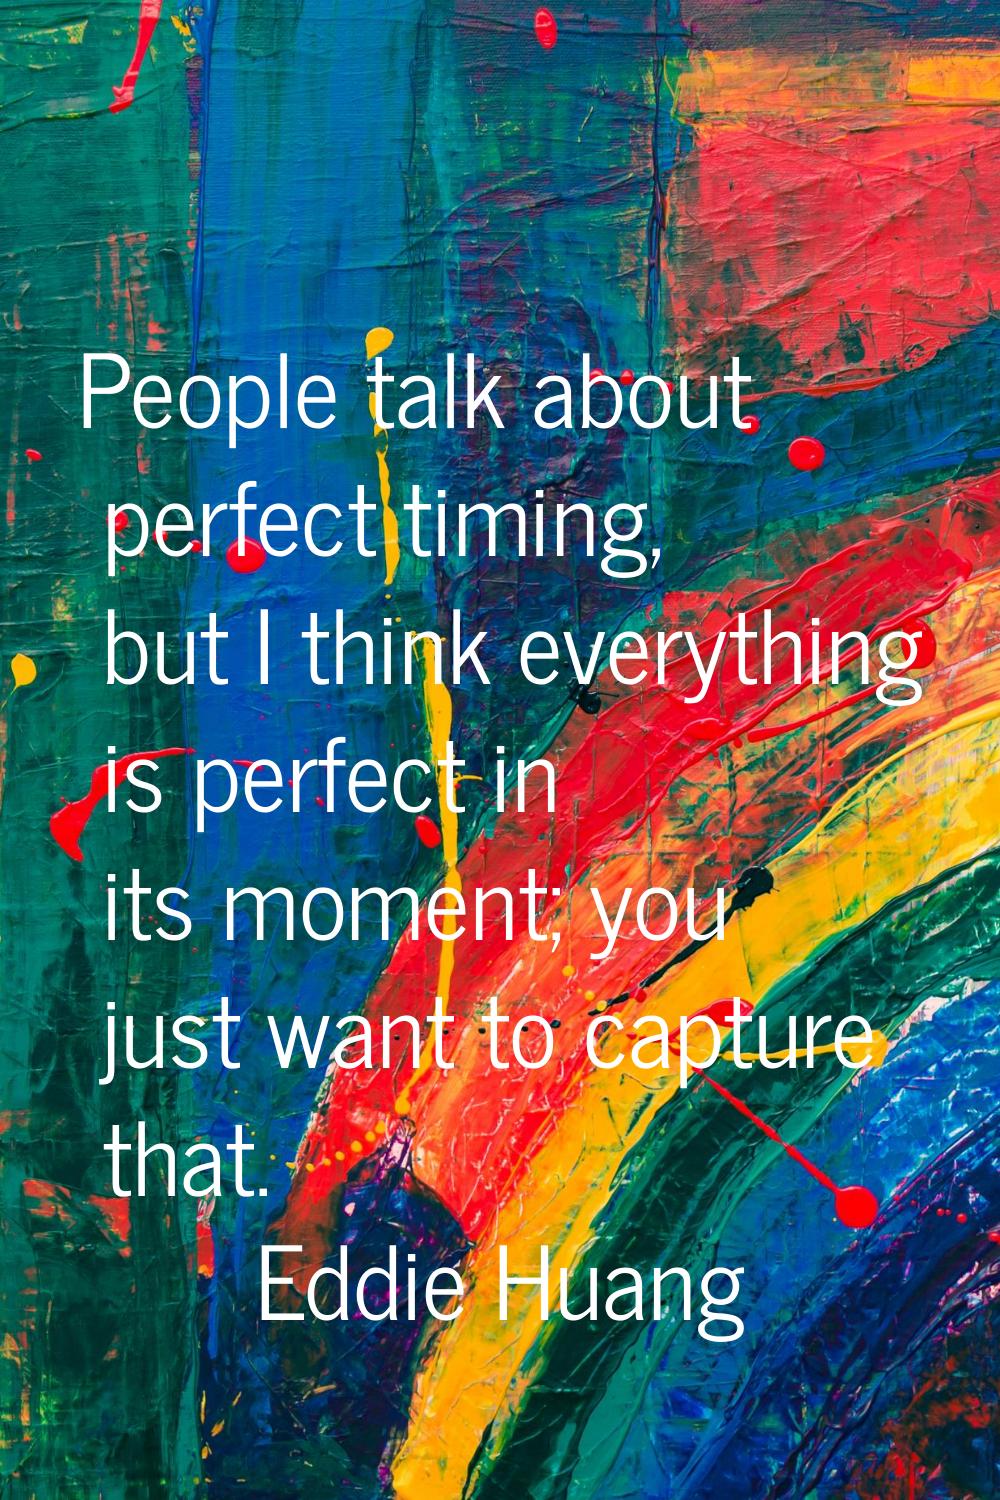 People talk about perfect timing, but I think everything is perfect in its moment; you just want to